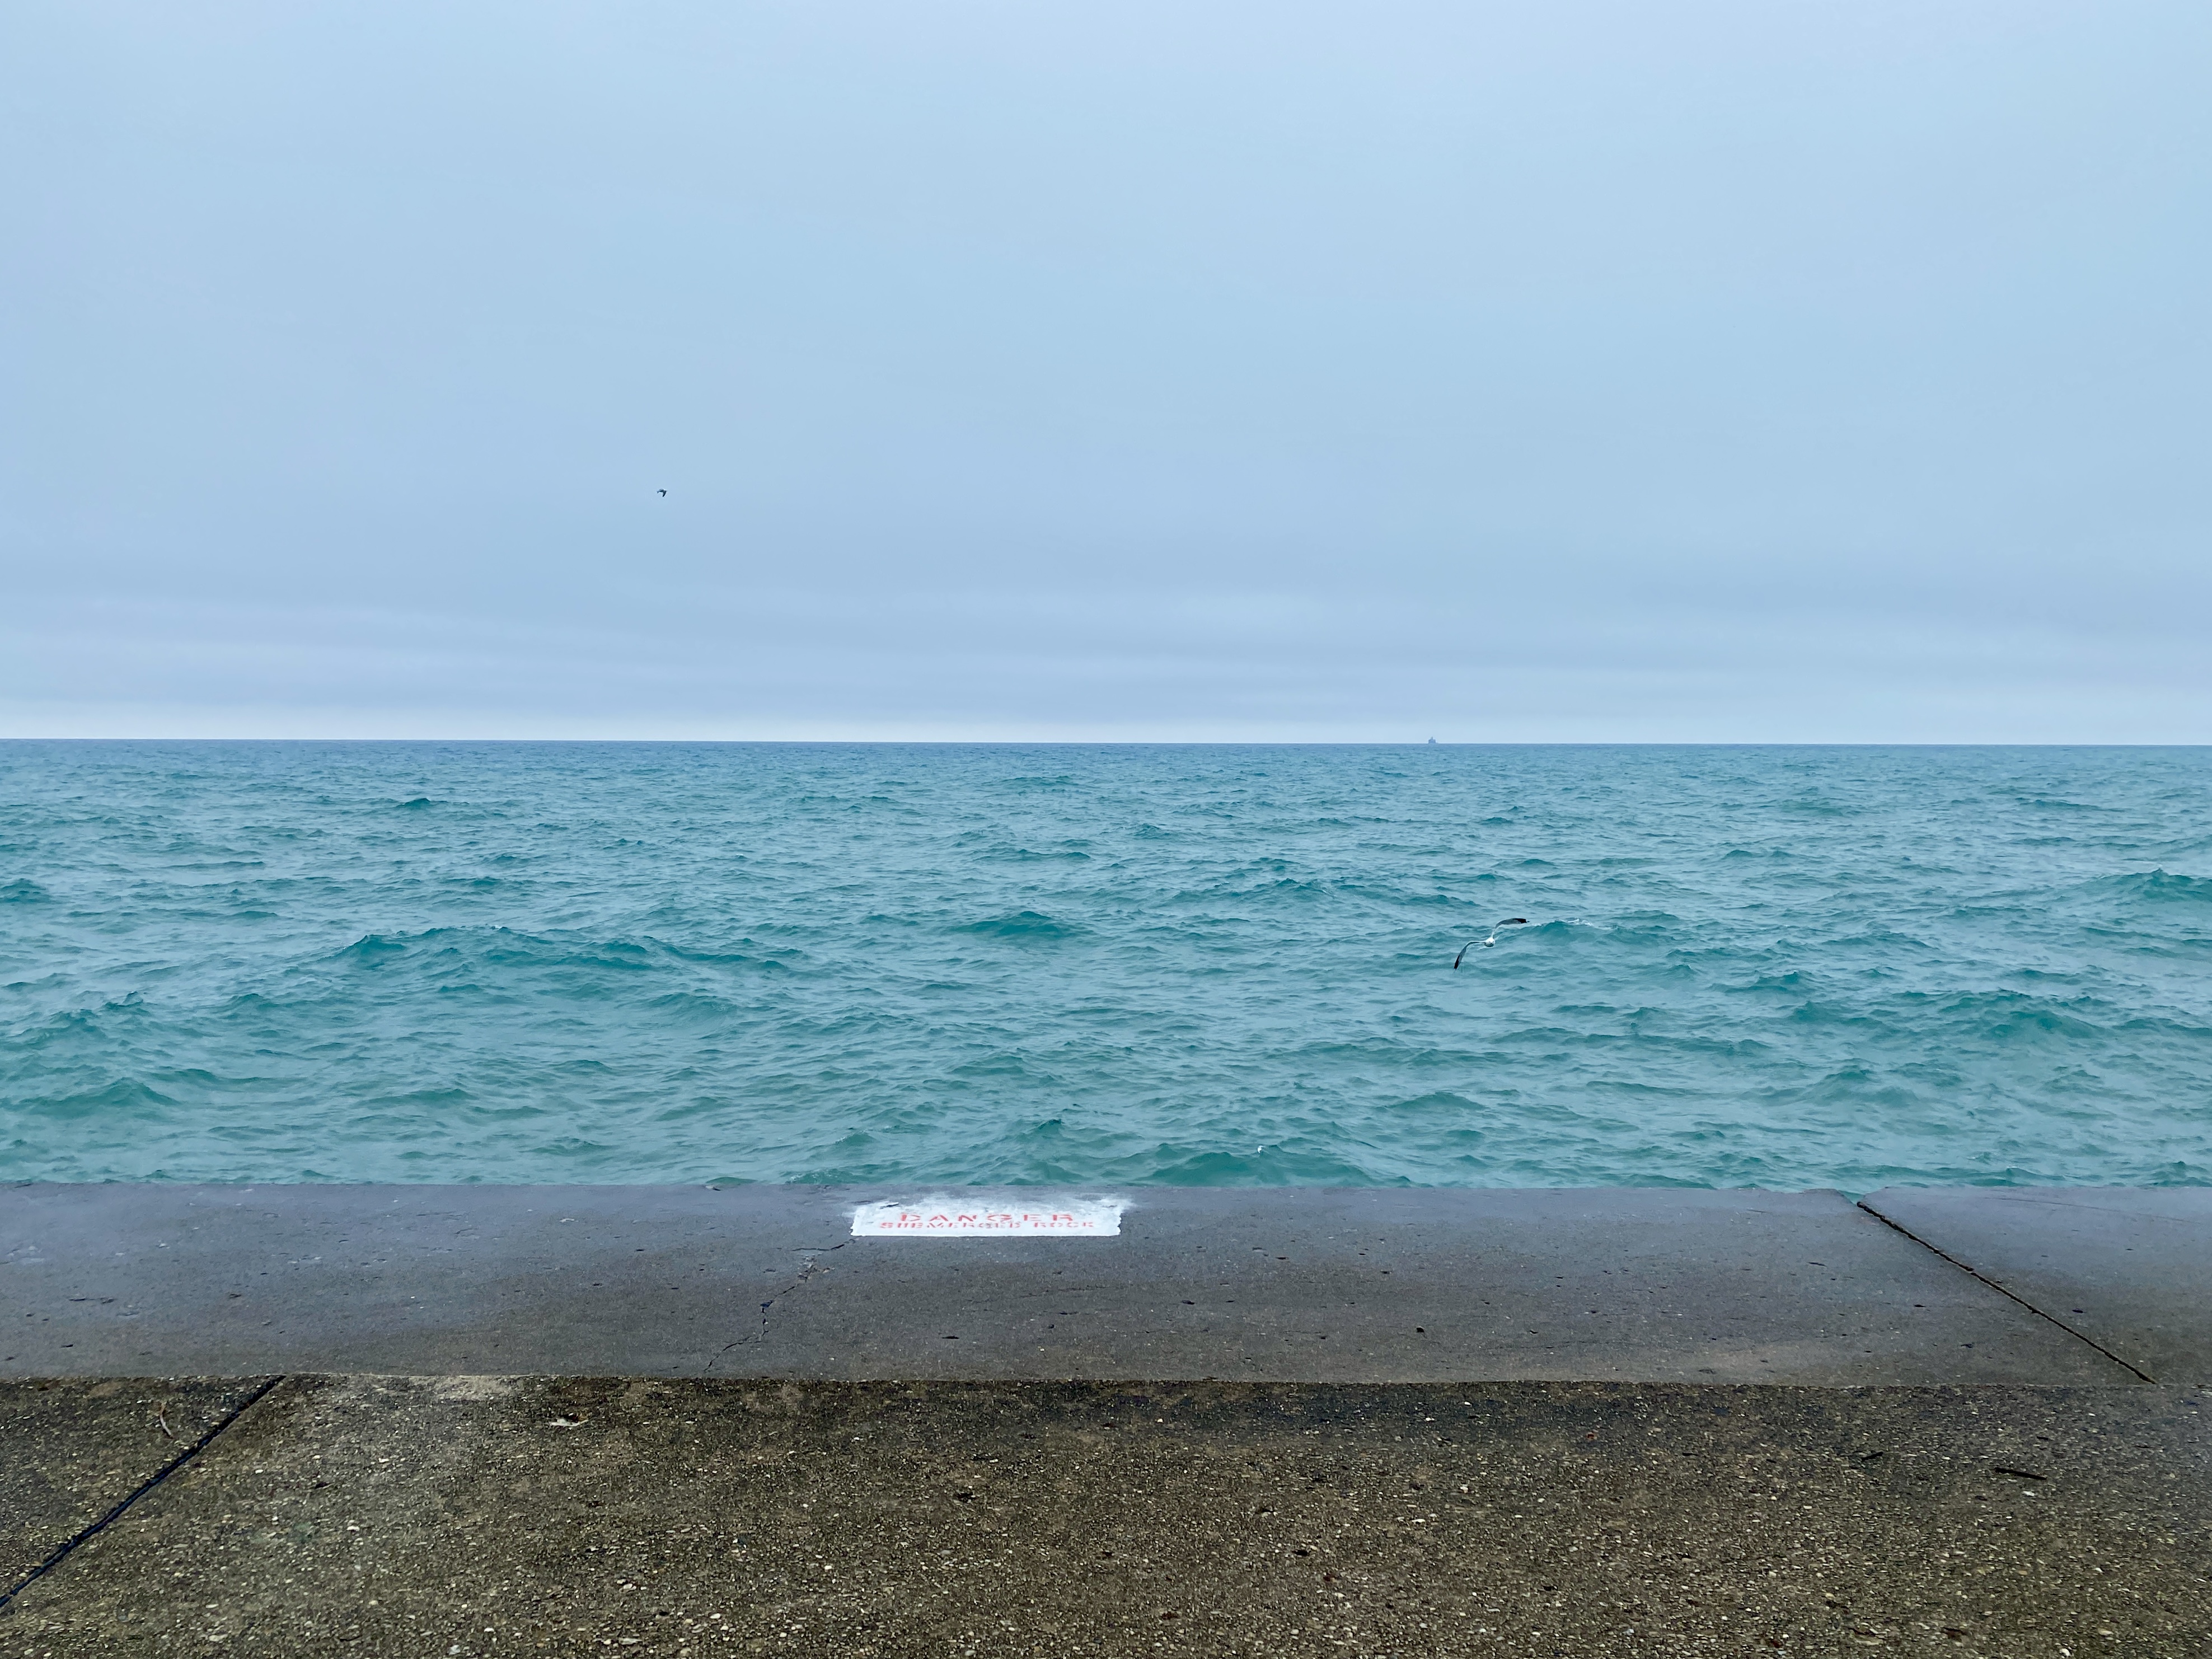 Horizon of a cloudy pale blue sky meeting a large lake with moderate waves of turquoise with a strip of concrete in the foreground